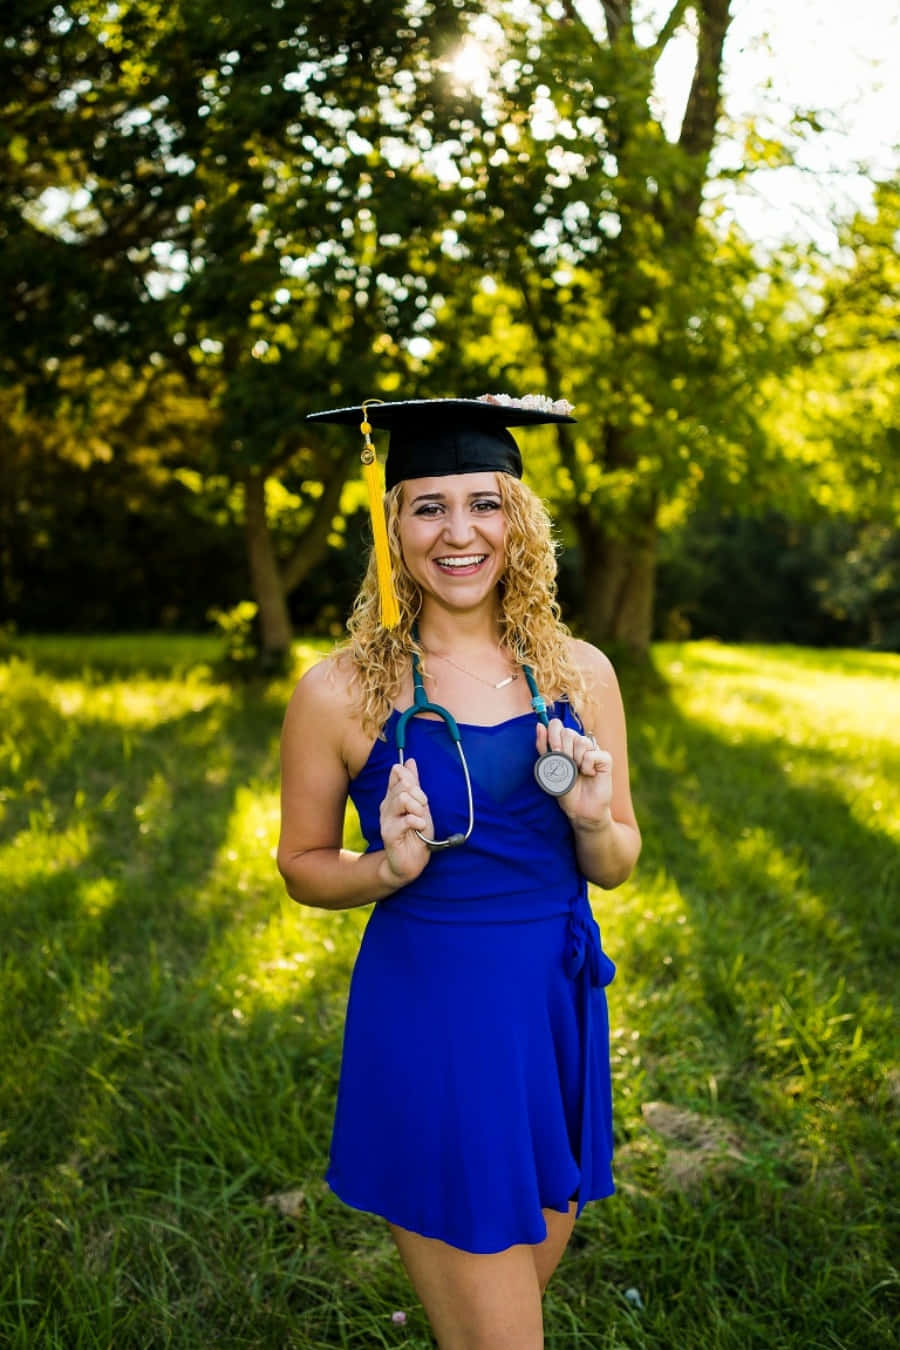 A Young Woman In A Blue Dress And Graduation Cap Poses For A Photo